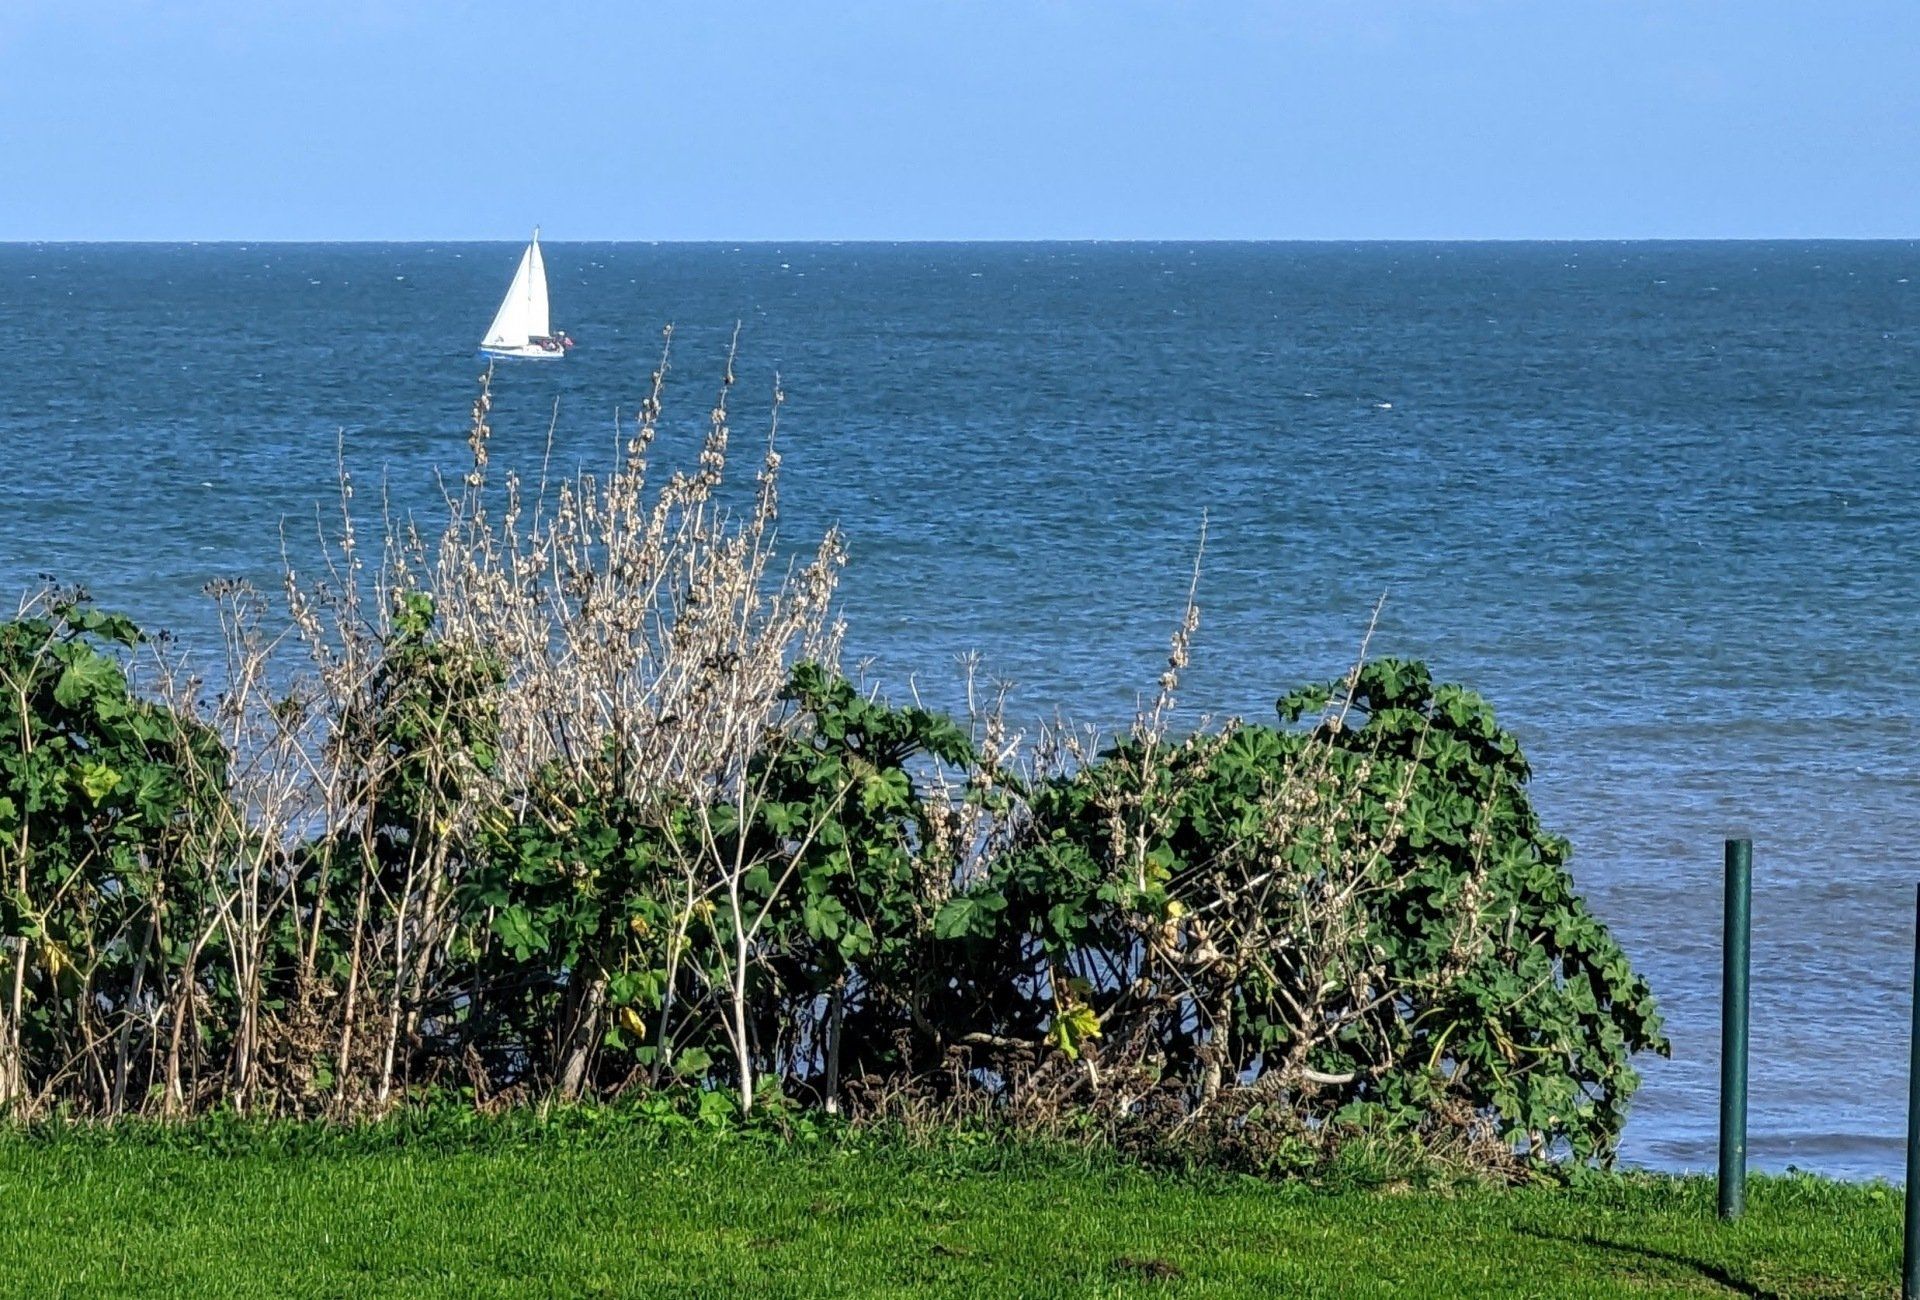 A view of the sea. There are some small bushes in the foreground and the sea behind them. There is a sailboat on the sea.